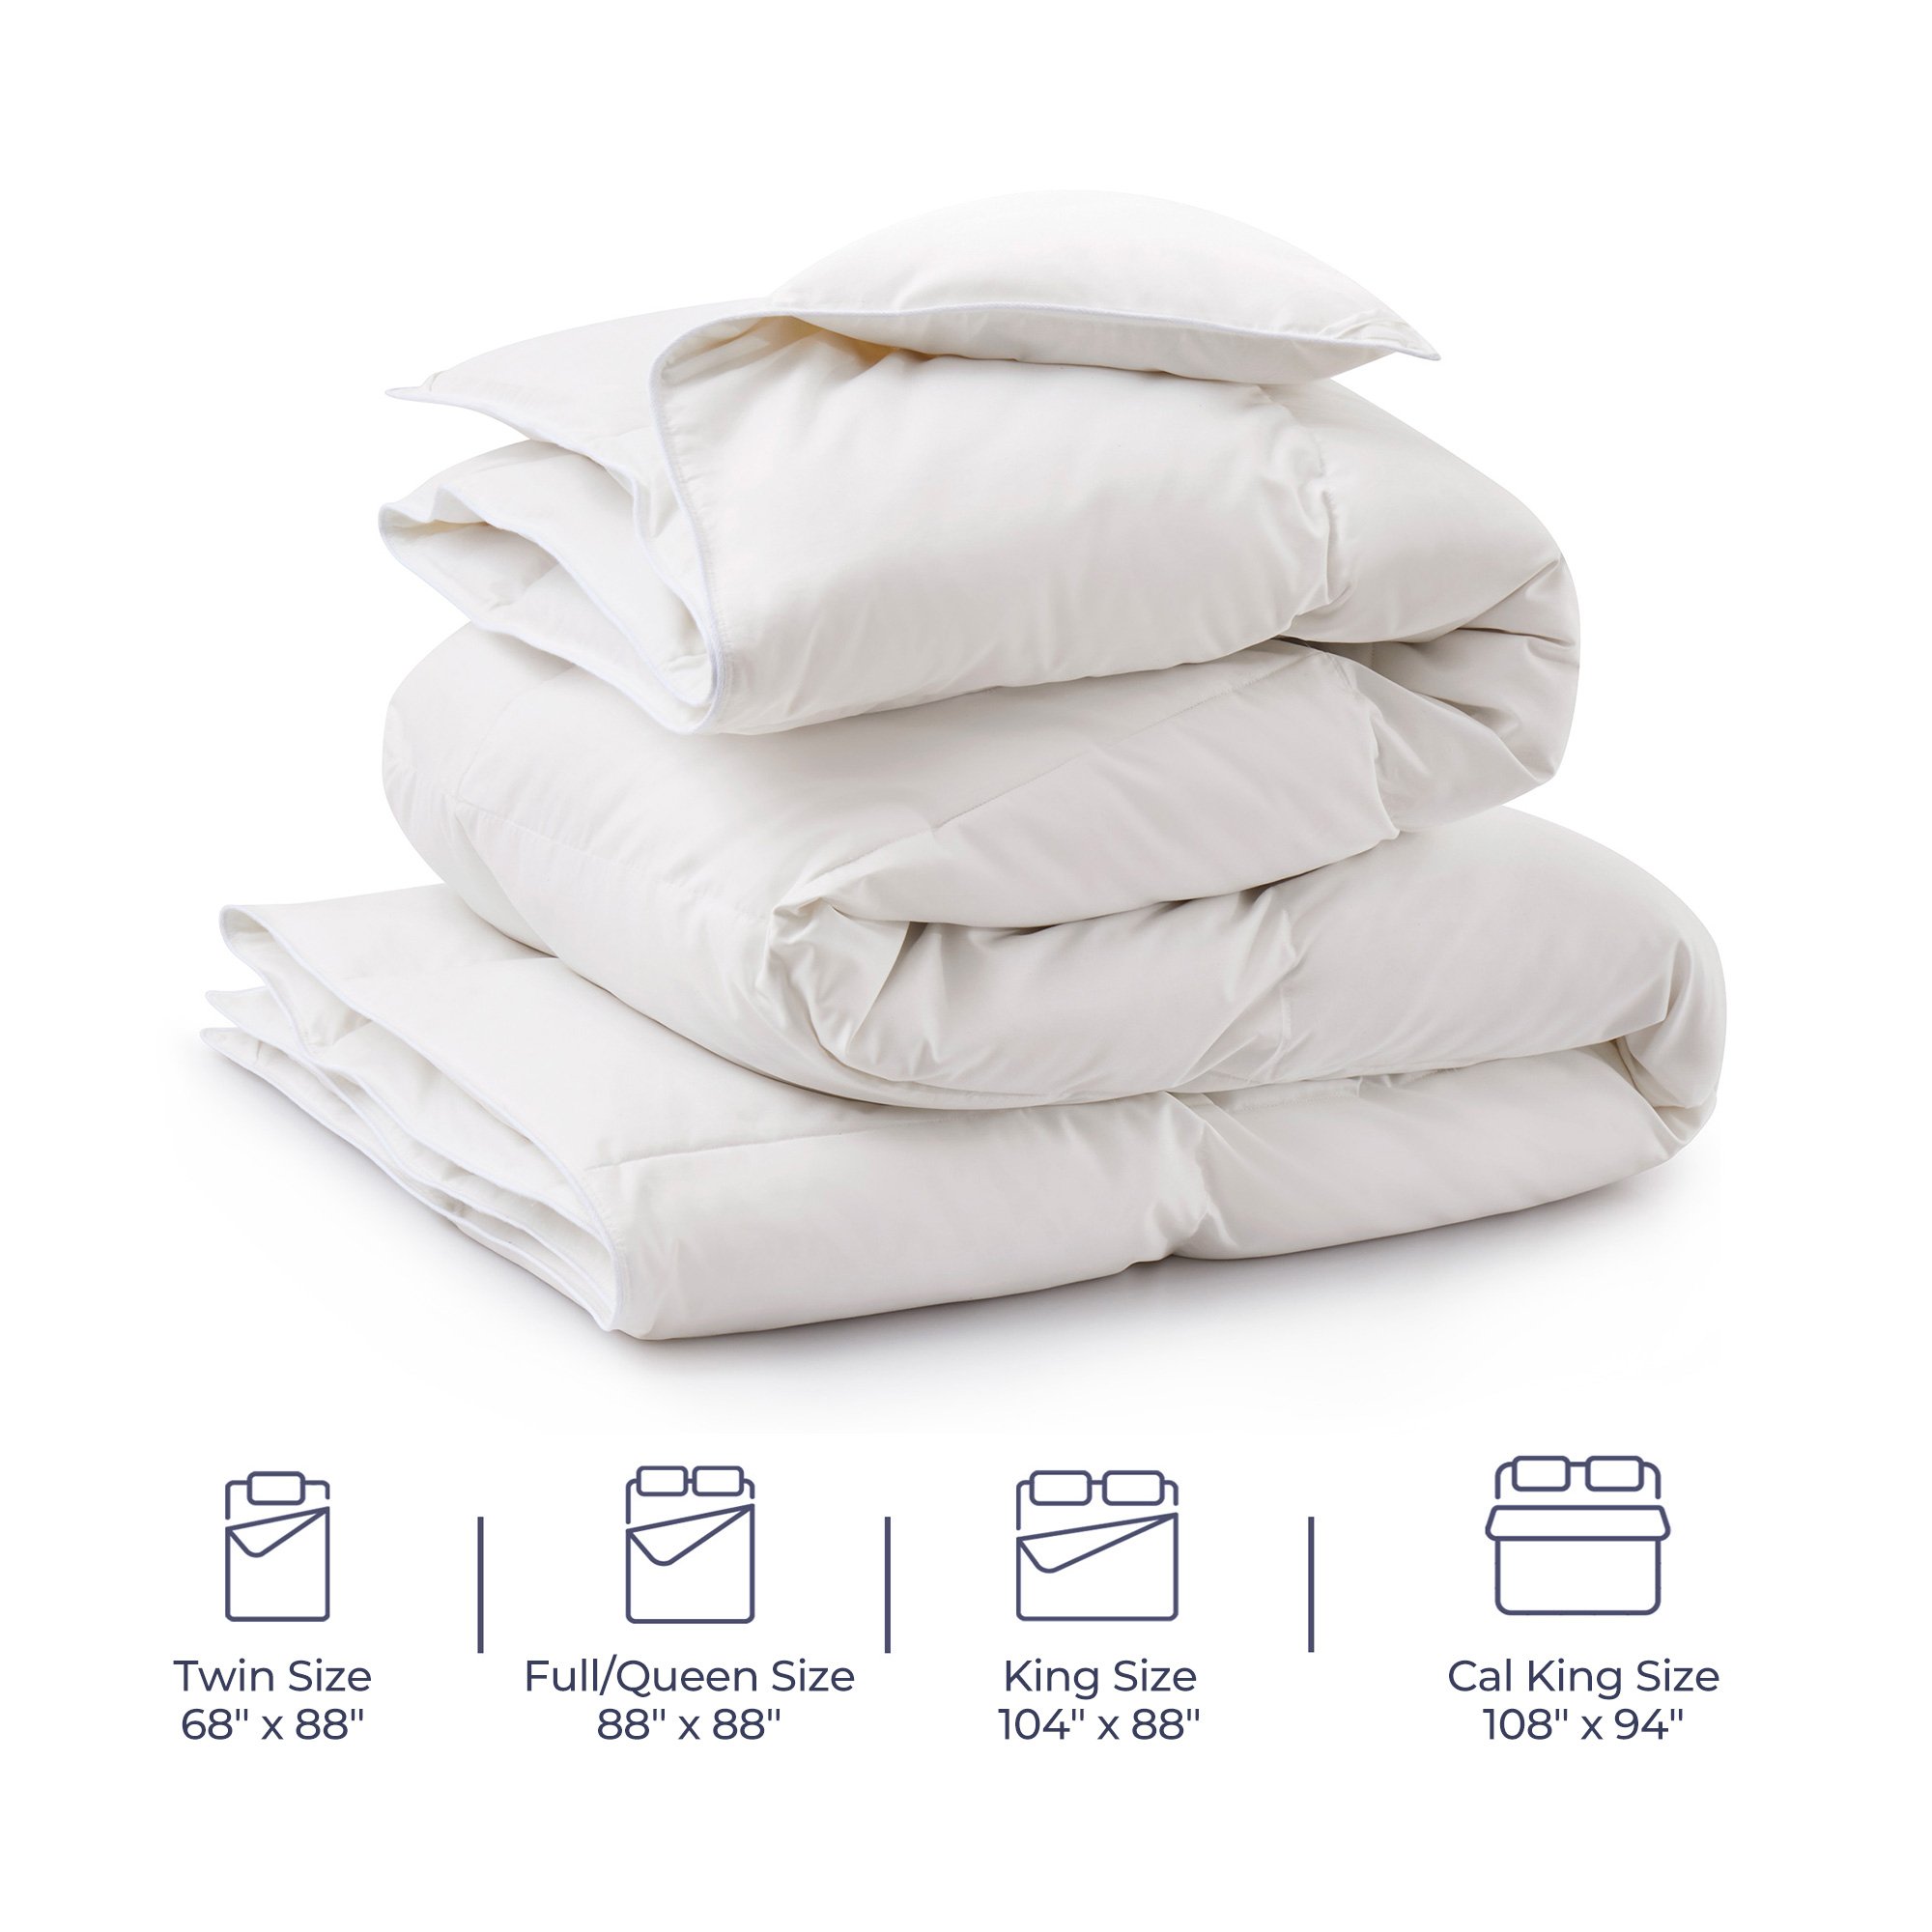 Premium All Seasons White Goose Feather Fiber And Down Comforter - Lucent White, King